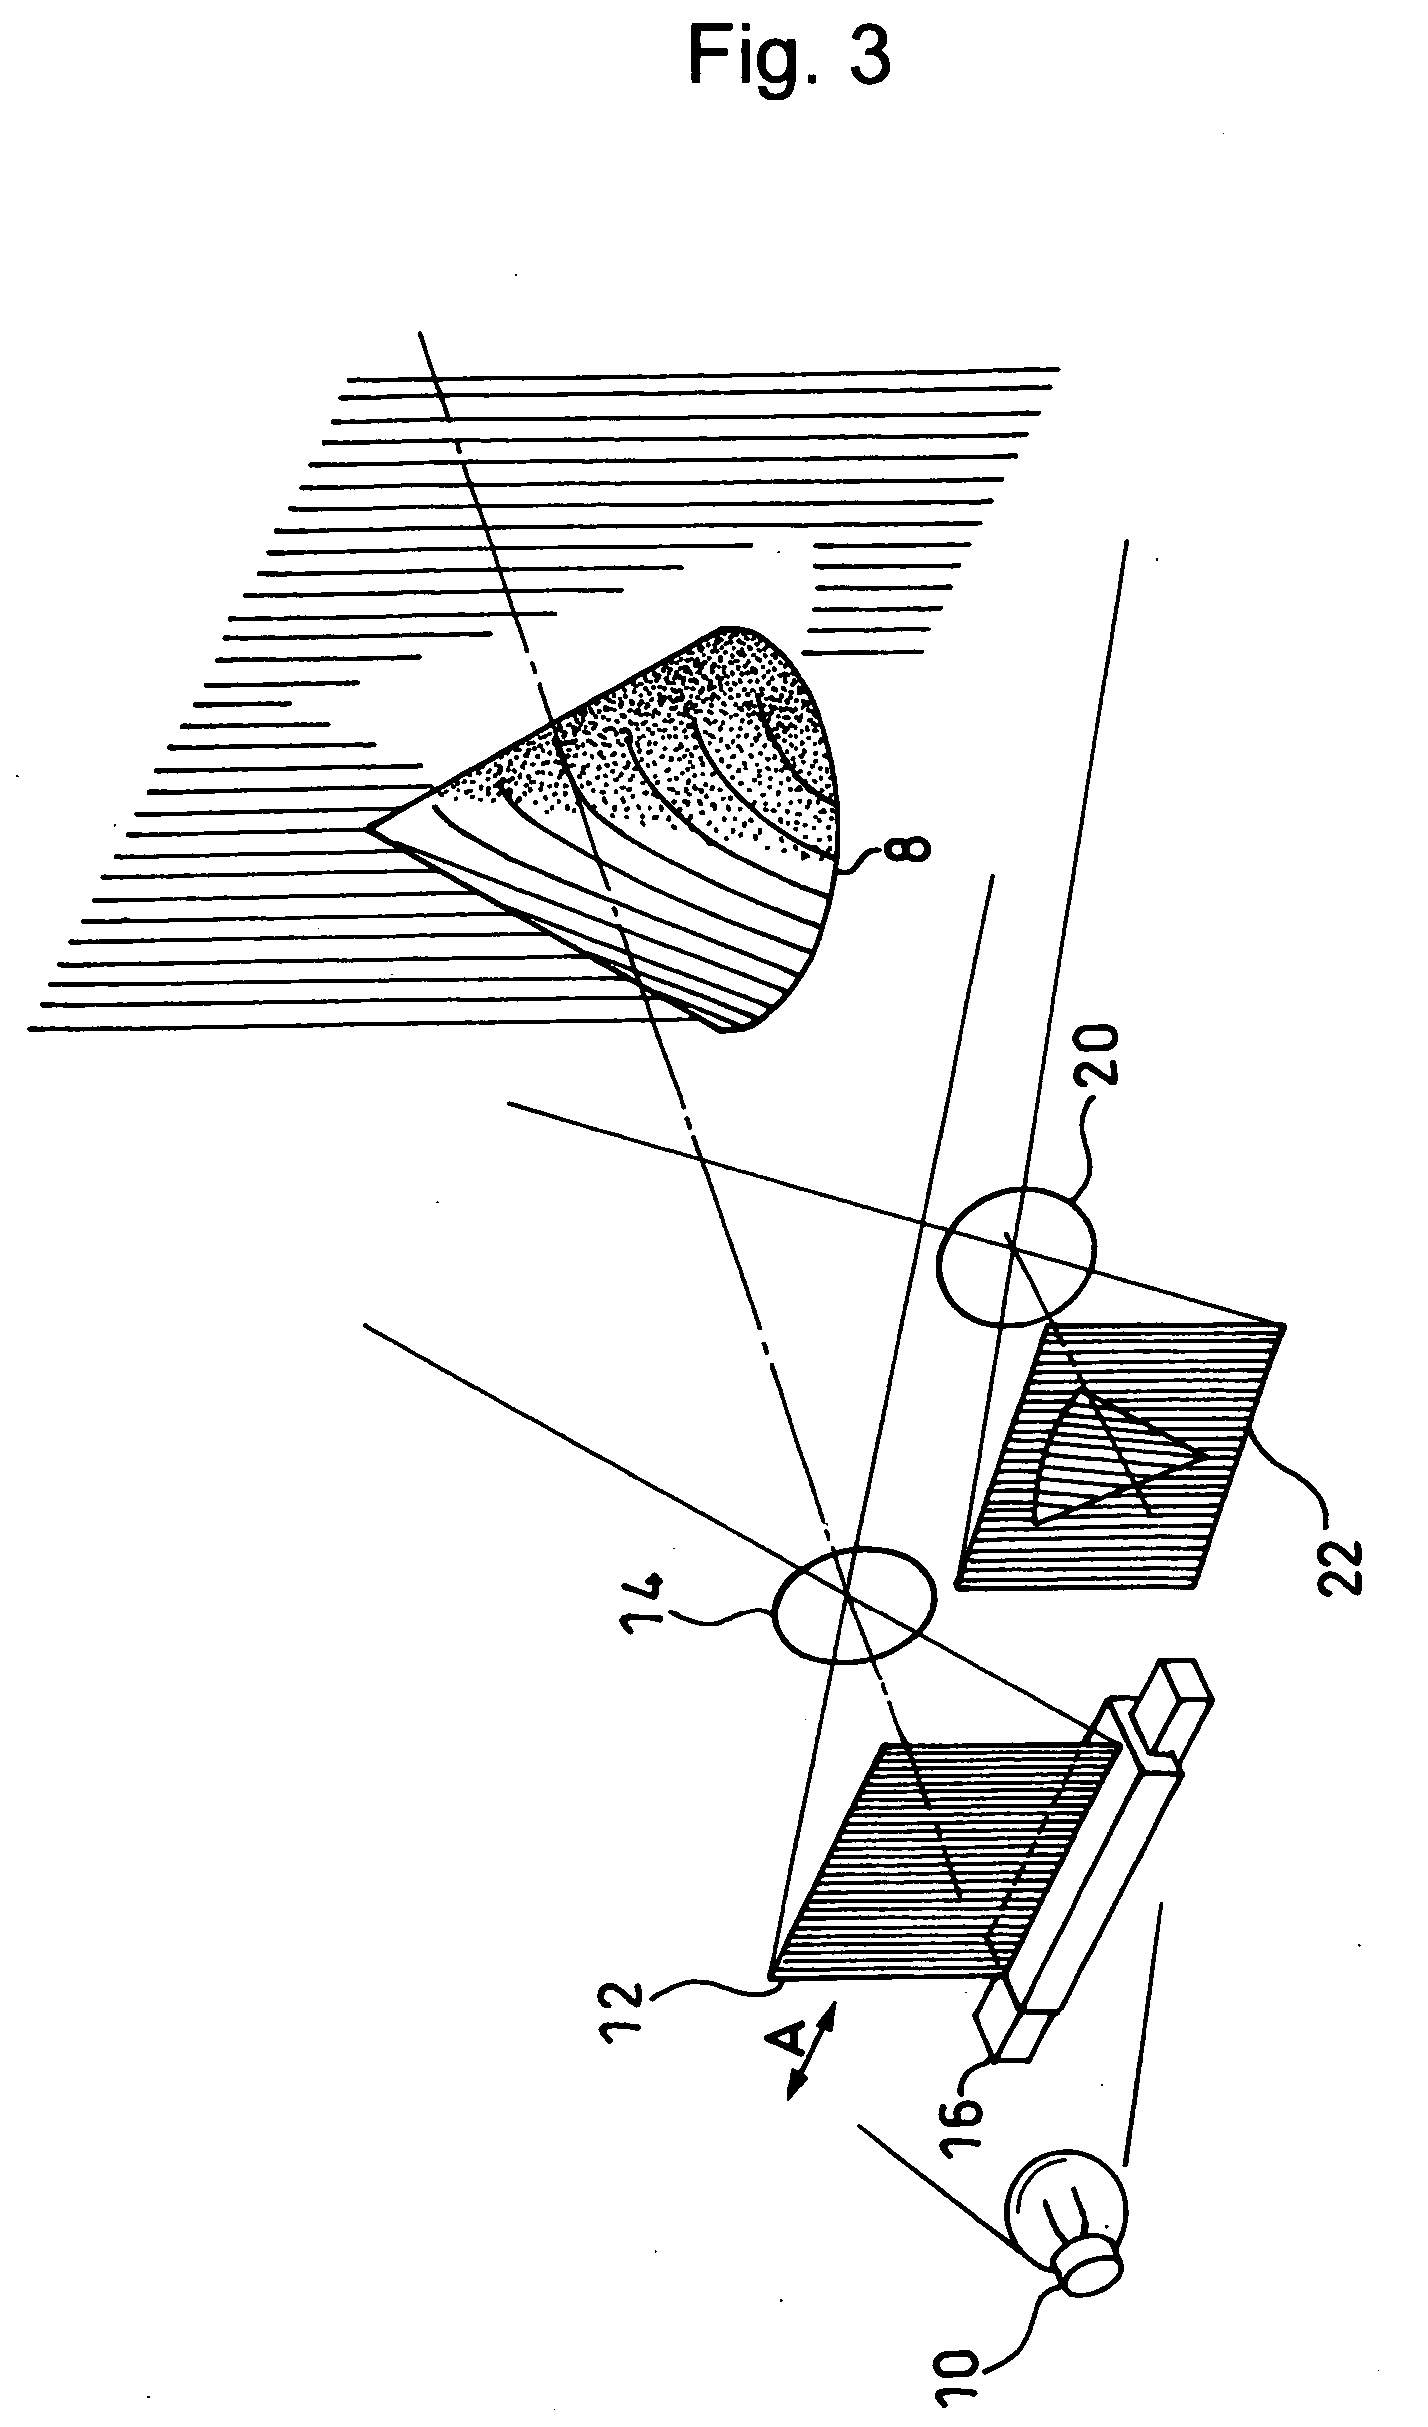 Method and apparatus for non-contact three-dimensional surface measurement